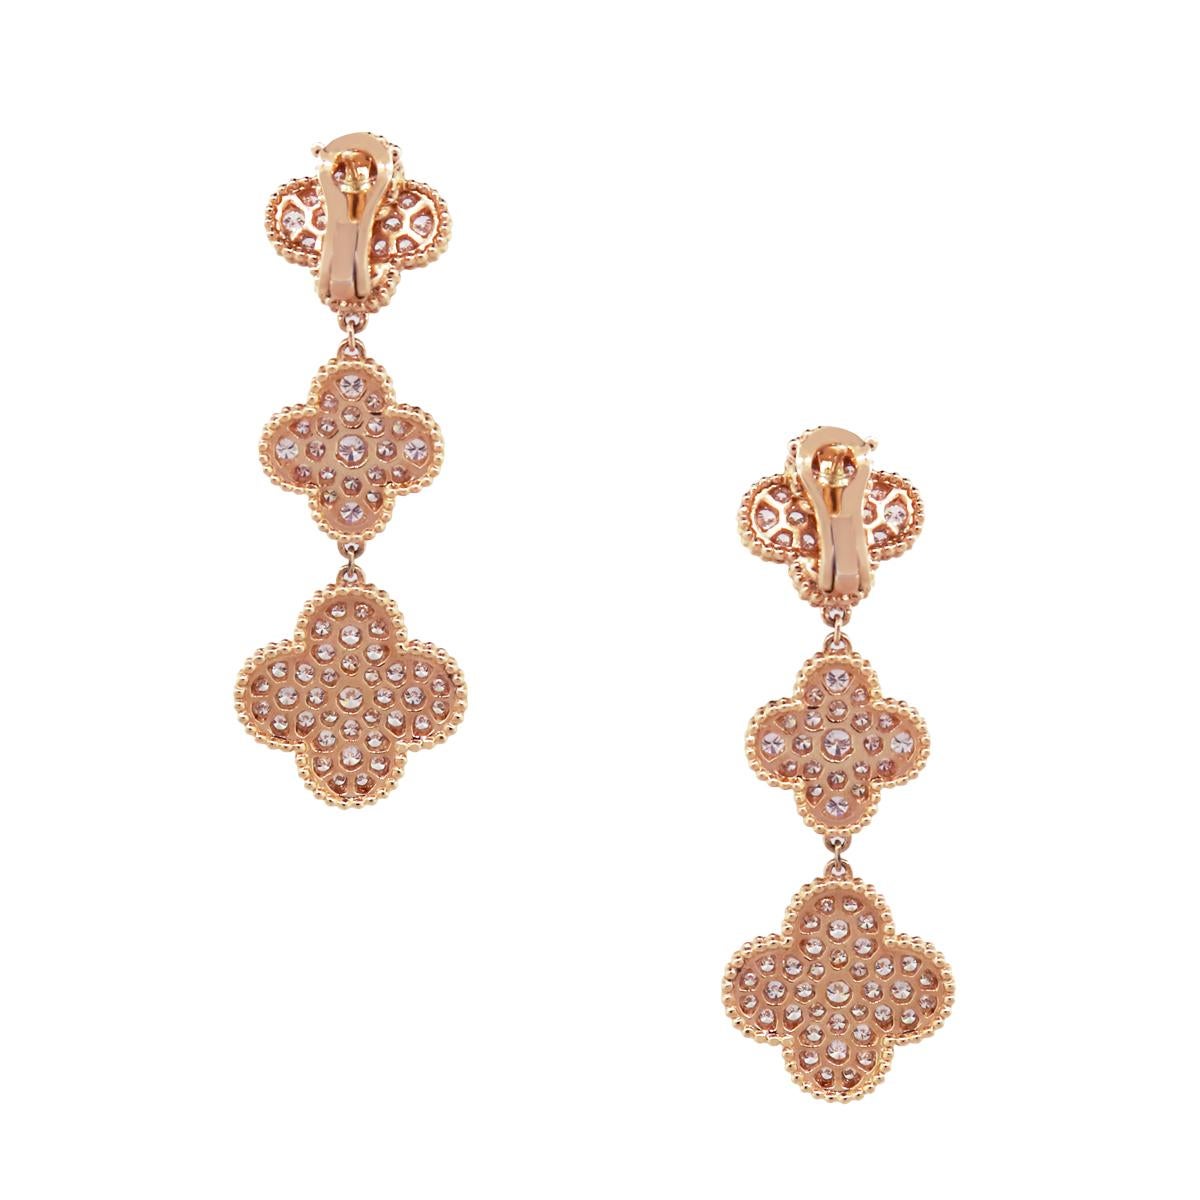 Material: 18k rose gold
Diamond Details: Approximately 4.34ctw round brilliant diamonds. Diamonds are G/H in color and VS in clarity.
Earring Measurements: 0.75″ x 0.07″ x 2.25″
Total Weight: 23.3g (15dwt)
Earring backs: Omega backs 
SKU: G9308